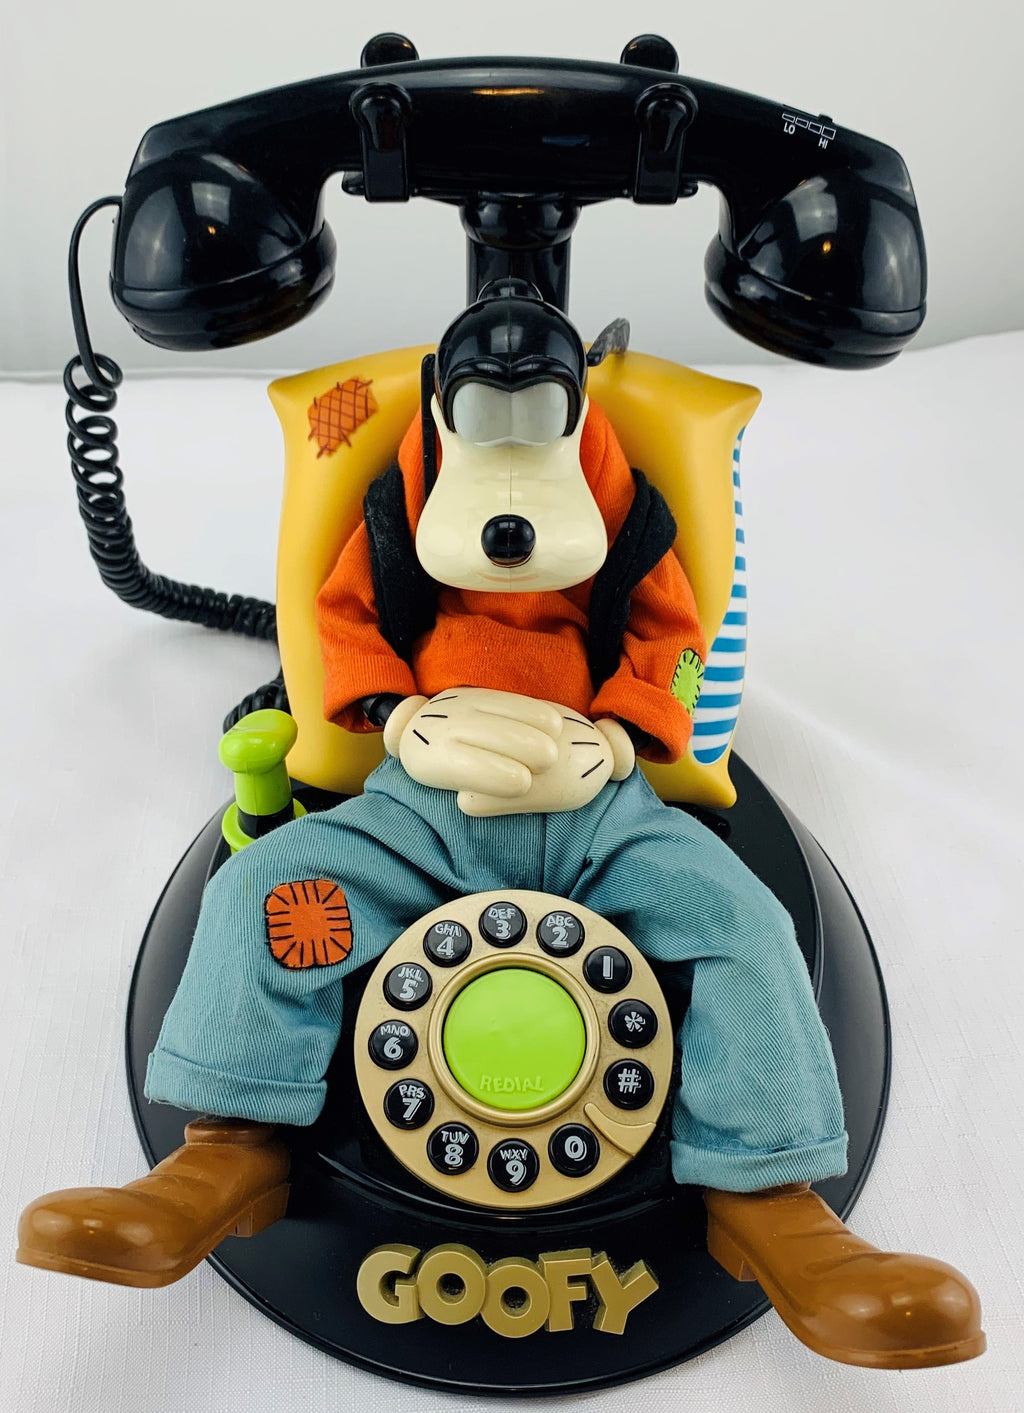 Goofy Animated Talking Phone Telemania Disney - Working - Clean - Great Condition